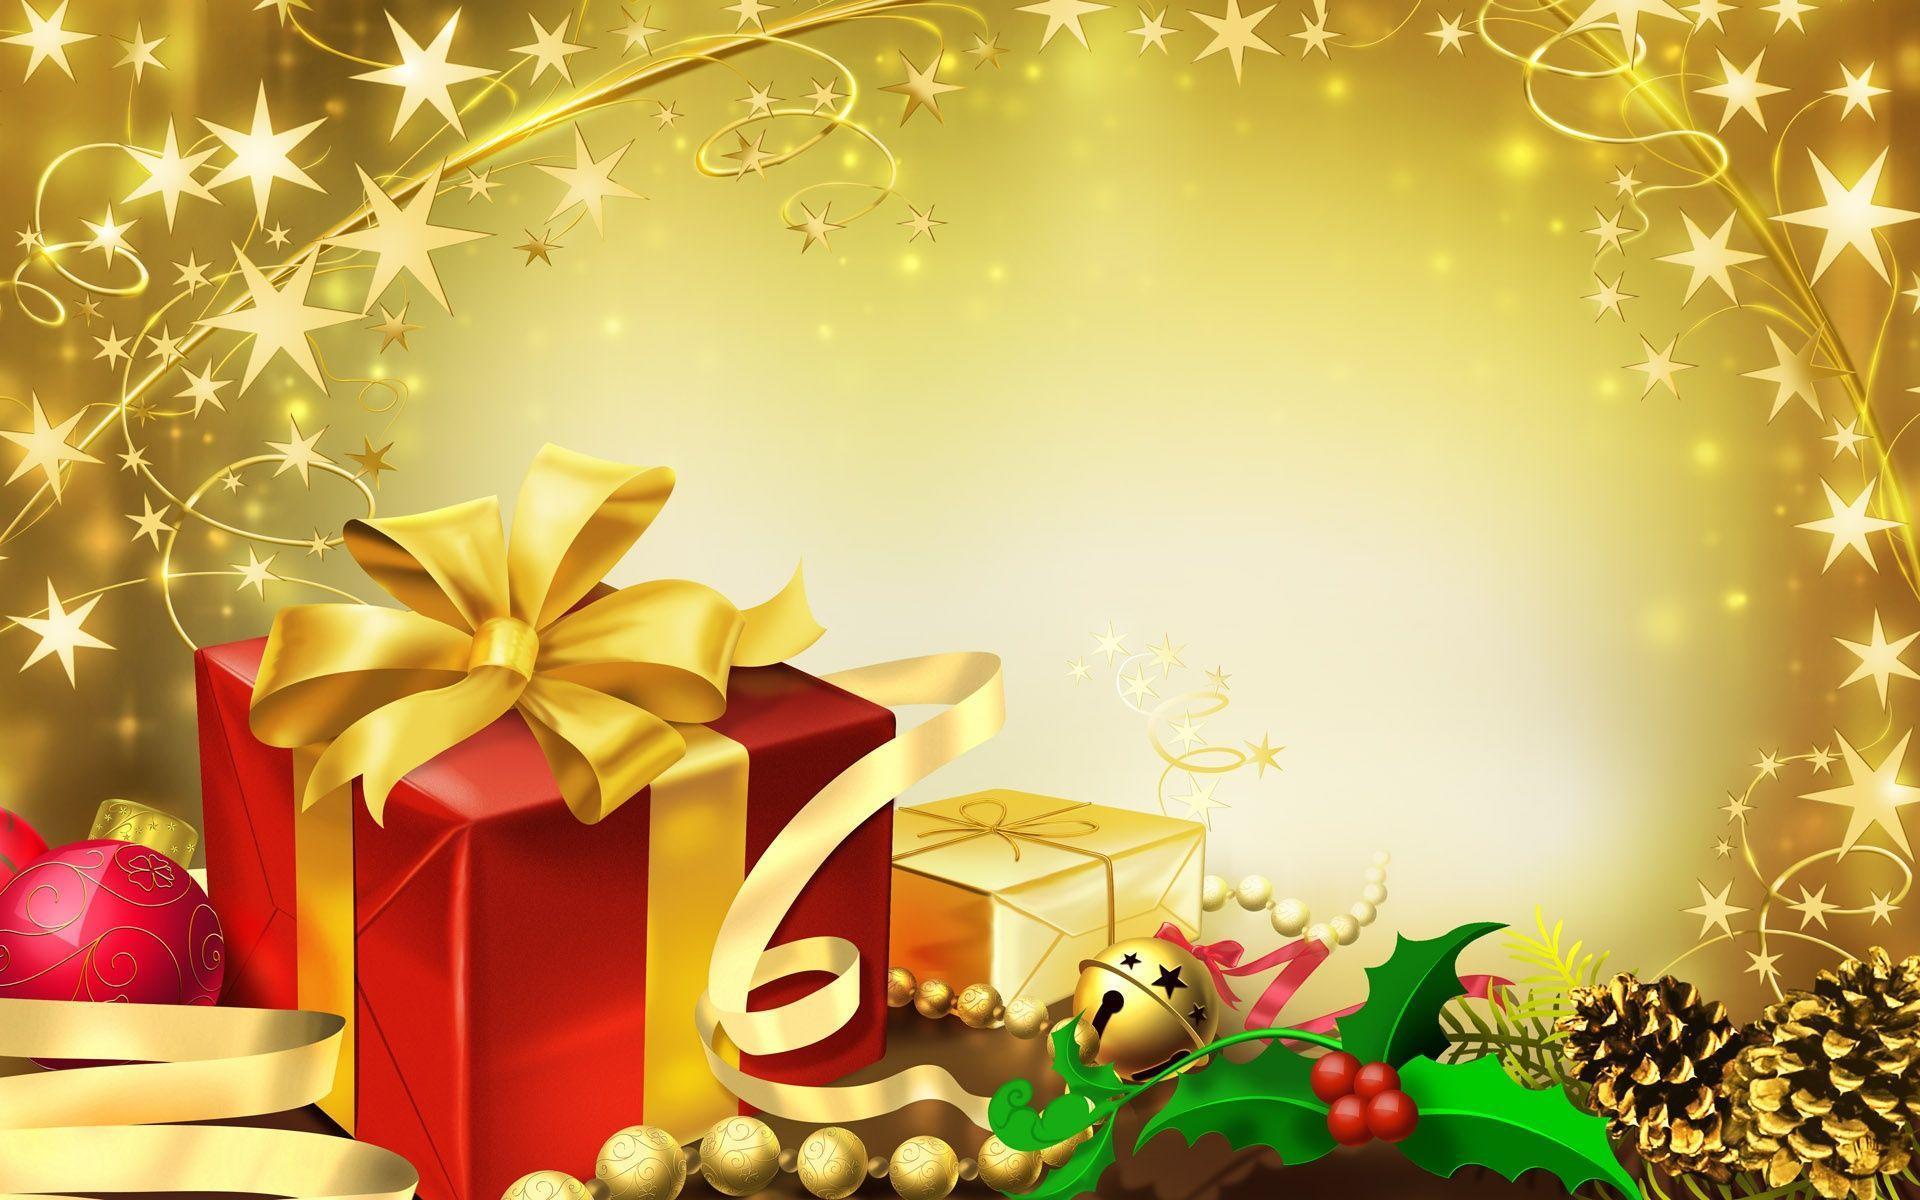 Colorful Gifts for Christmas Wallpaper in jpg format for free download